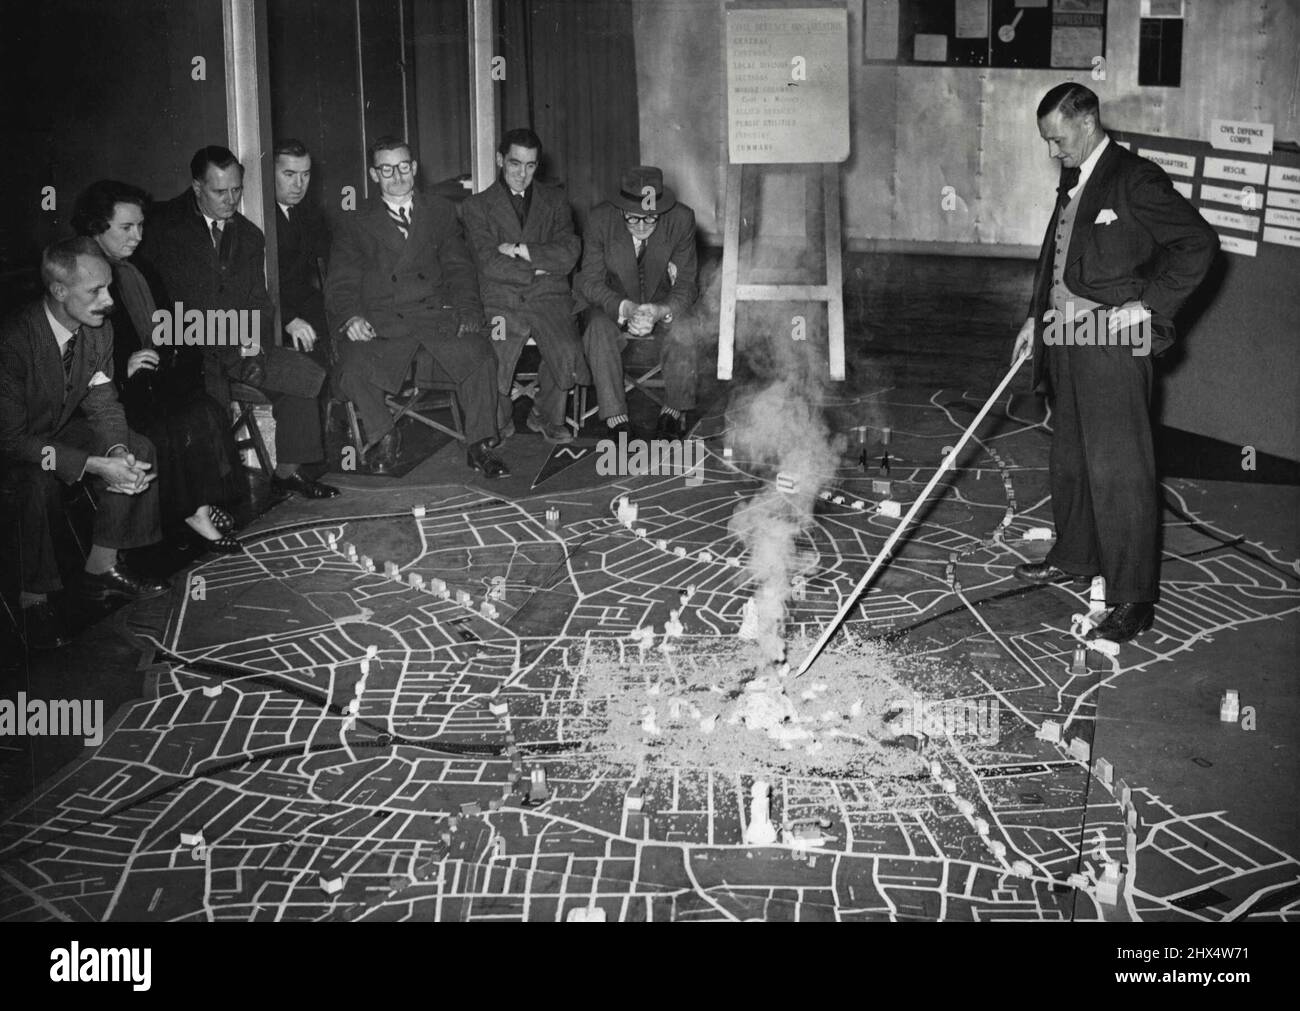 Floodlit Model Aids Civil Defense Training -- Members of The Camberwell Civil Defense receiving training with the aid of the at their floodlit floor model, at their Depot in Vale End, East Dulwich. In the center is Mr. F.W. Dyson, the instructor, who has made the wooden models for this scheme in is spare time, pointing out a realistic incident in the center of the Borough, the effect of which is aided by smoke. A new Civil Defense training method has been introduced in the Borough of Camberwell and other Boroughs throughout London are expected to follow it's lead. February 2, 1954. (Photo by F Stock Photo